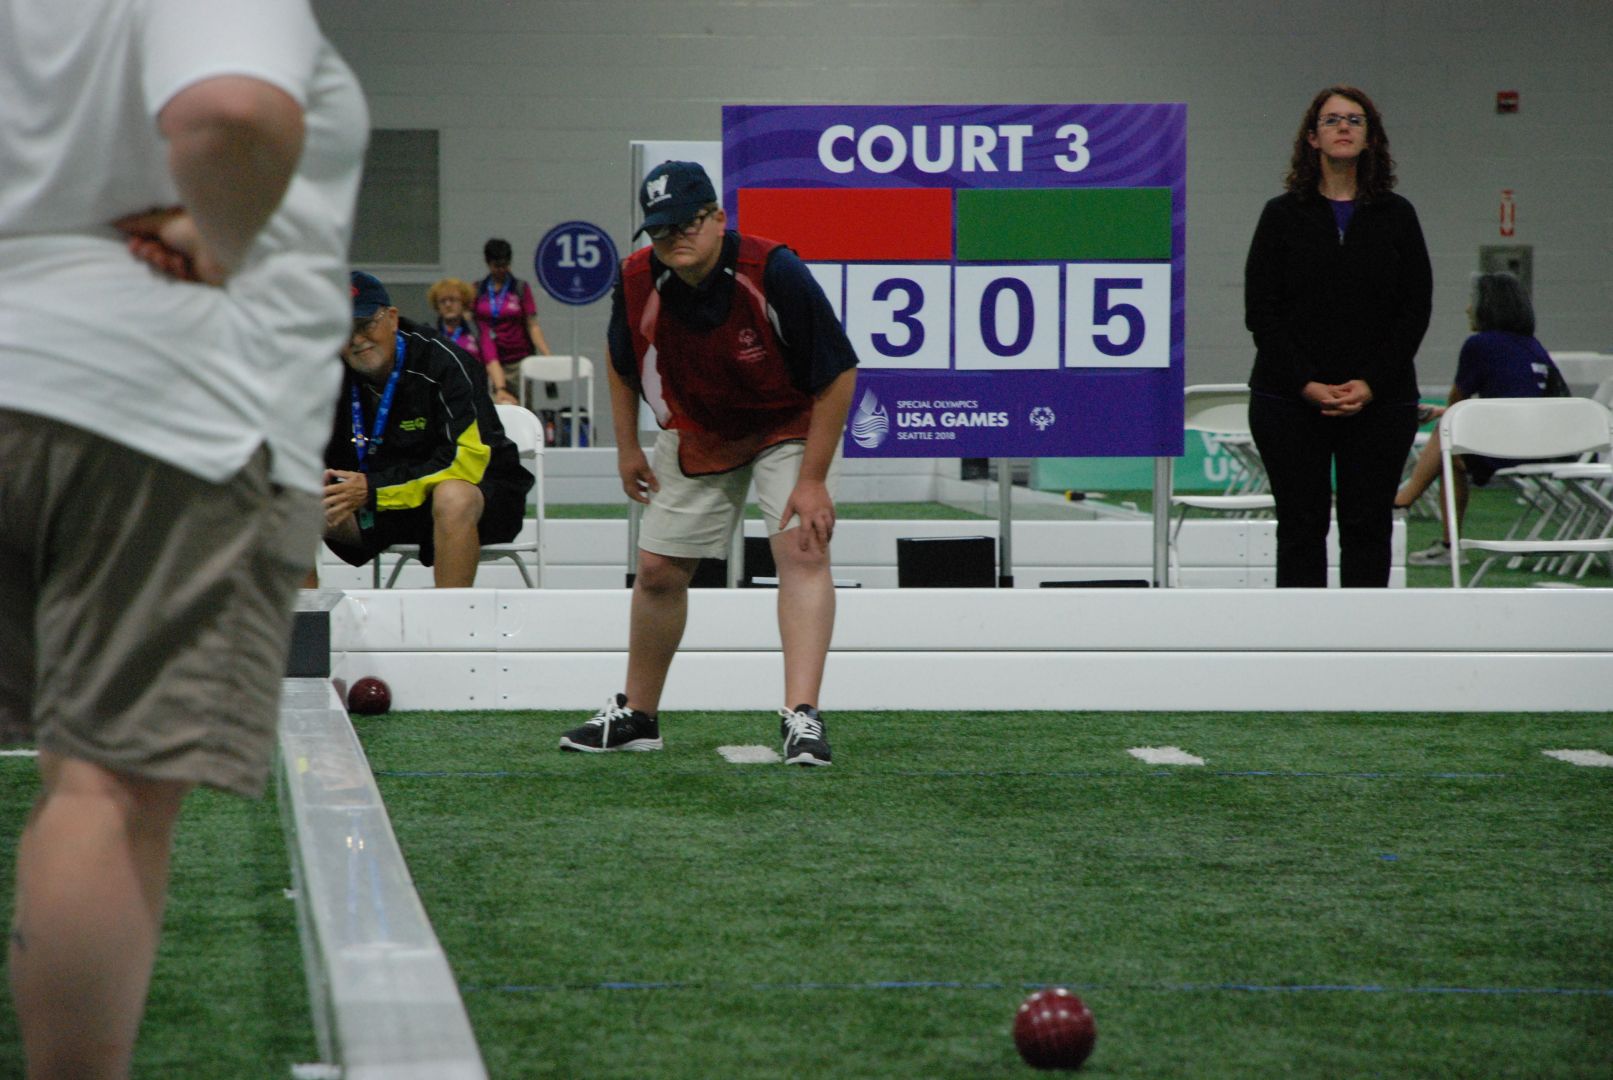 Tara Sanders has laser focus while competing in bocce